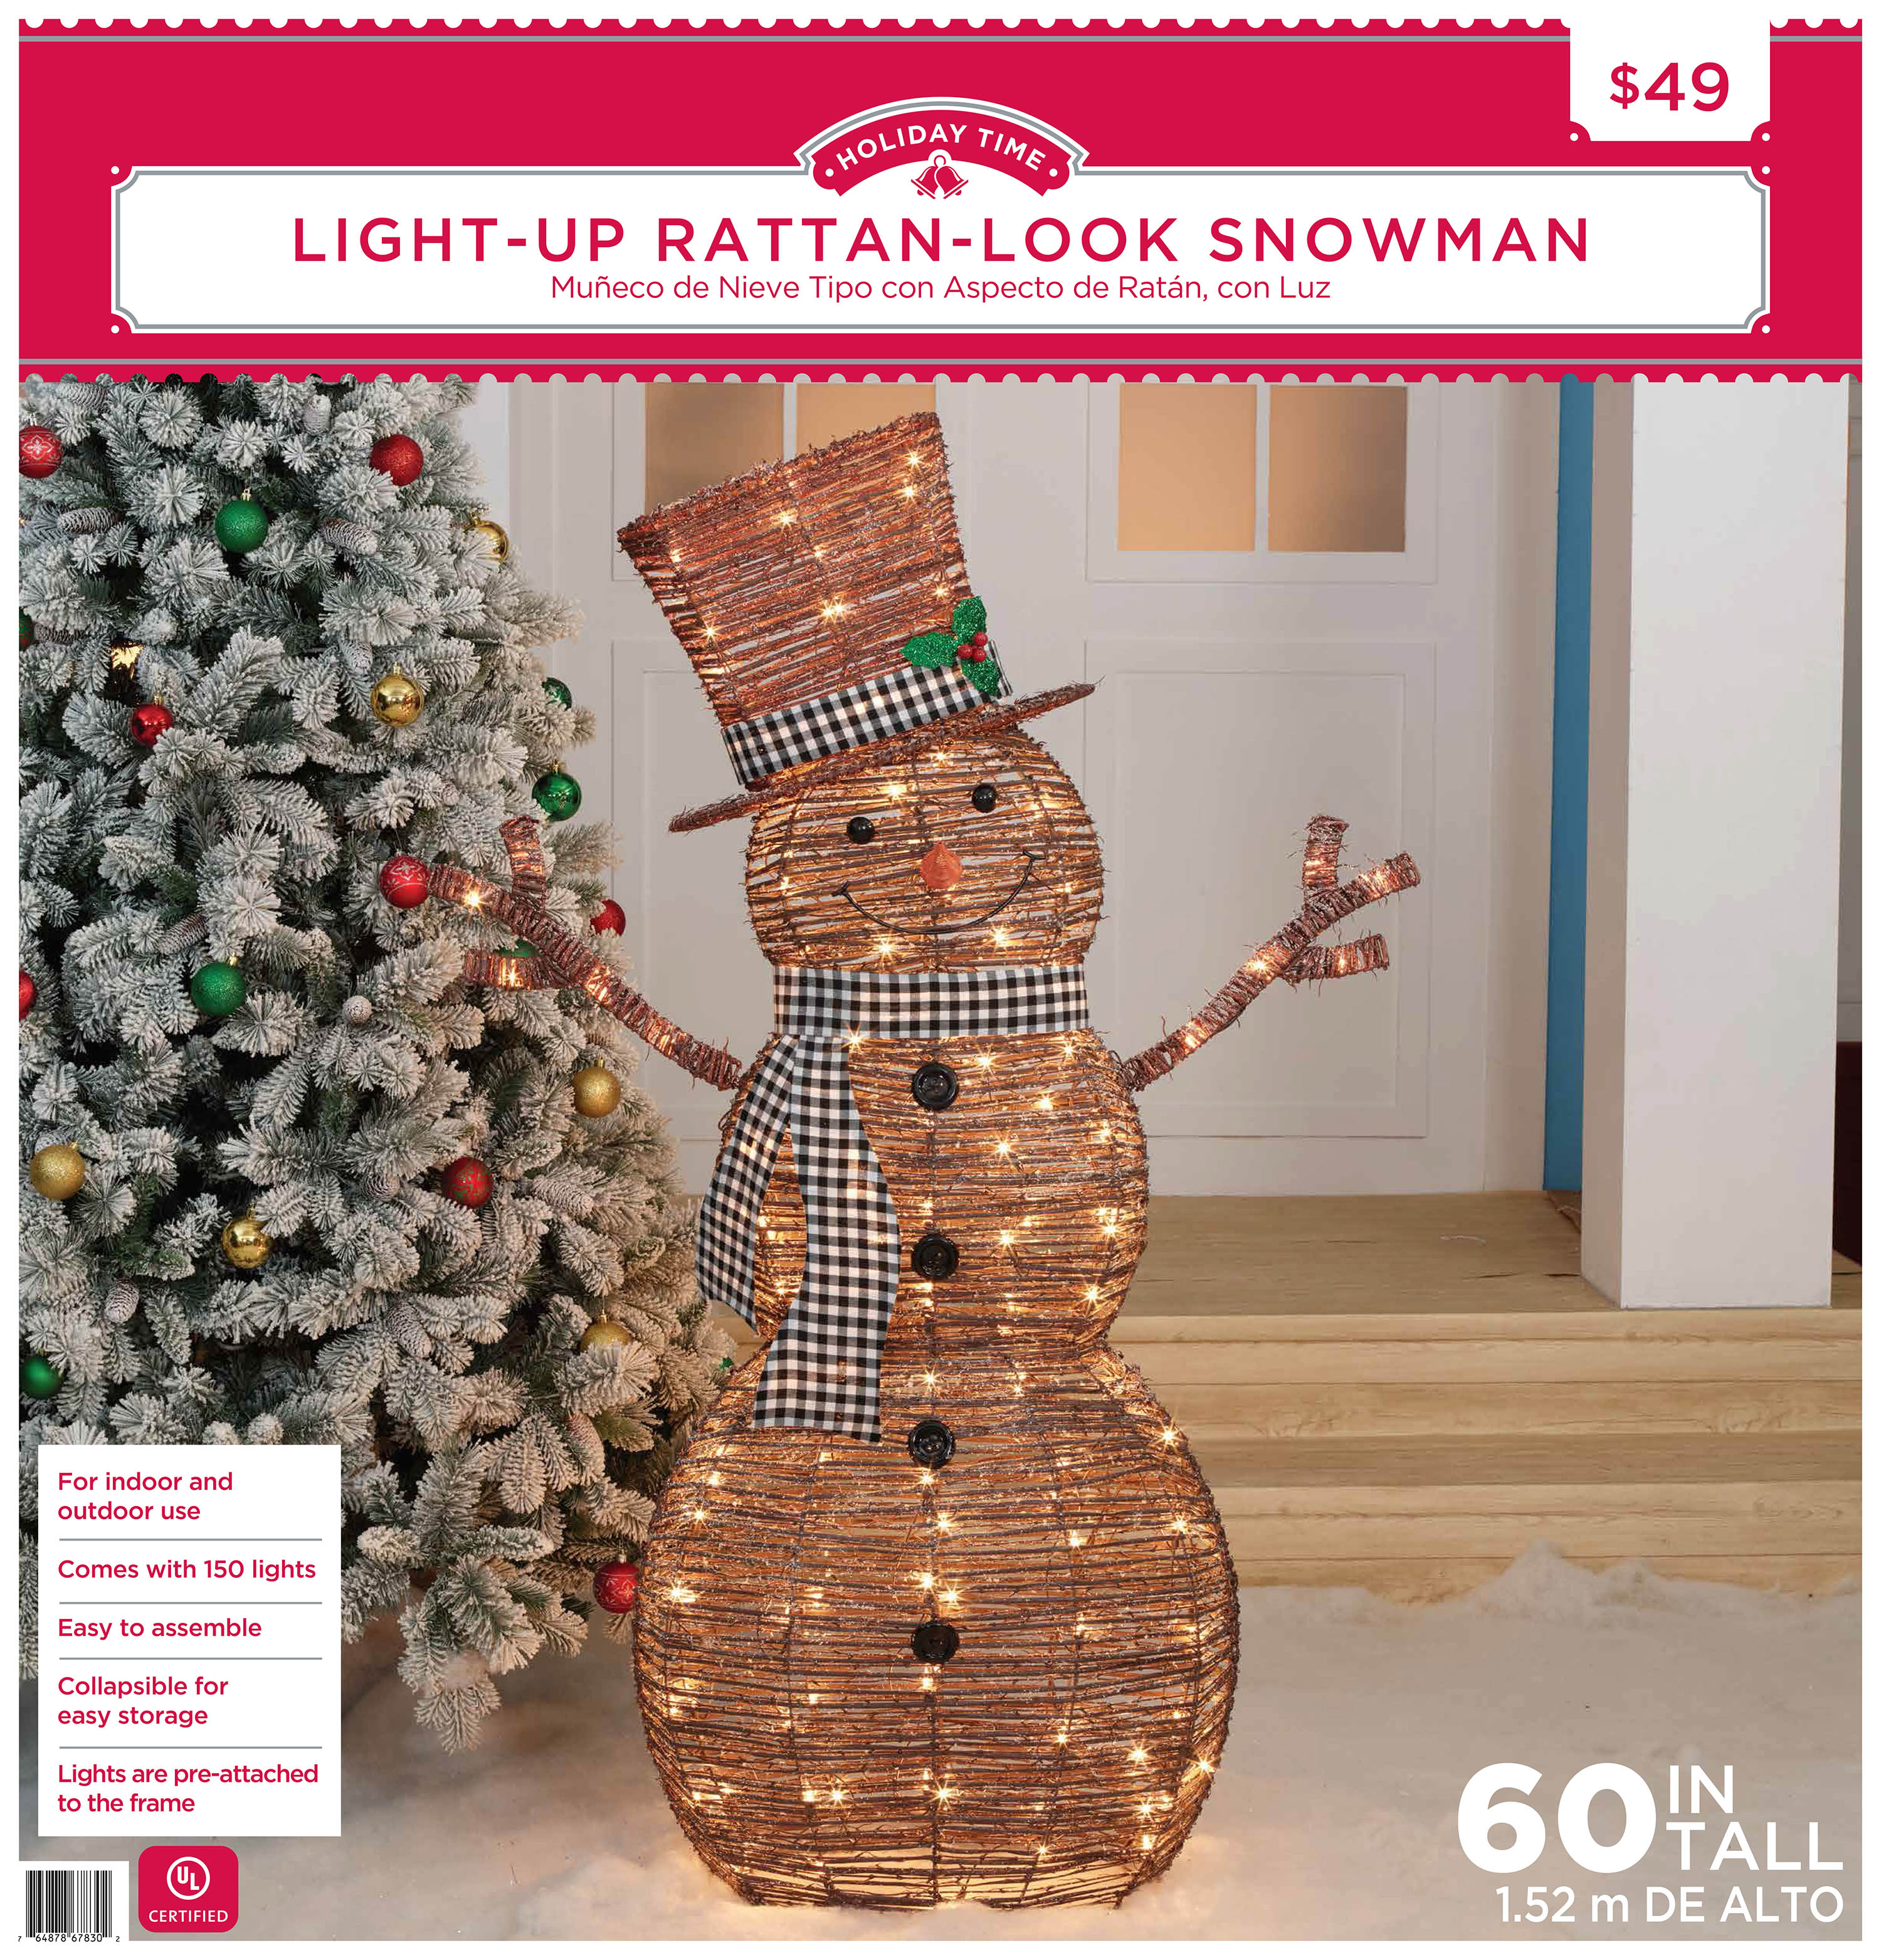 Holiday Time 60 inch Light-Up Rattan-Look Snowman, 150 Incandescent Lights - image 3 of 5